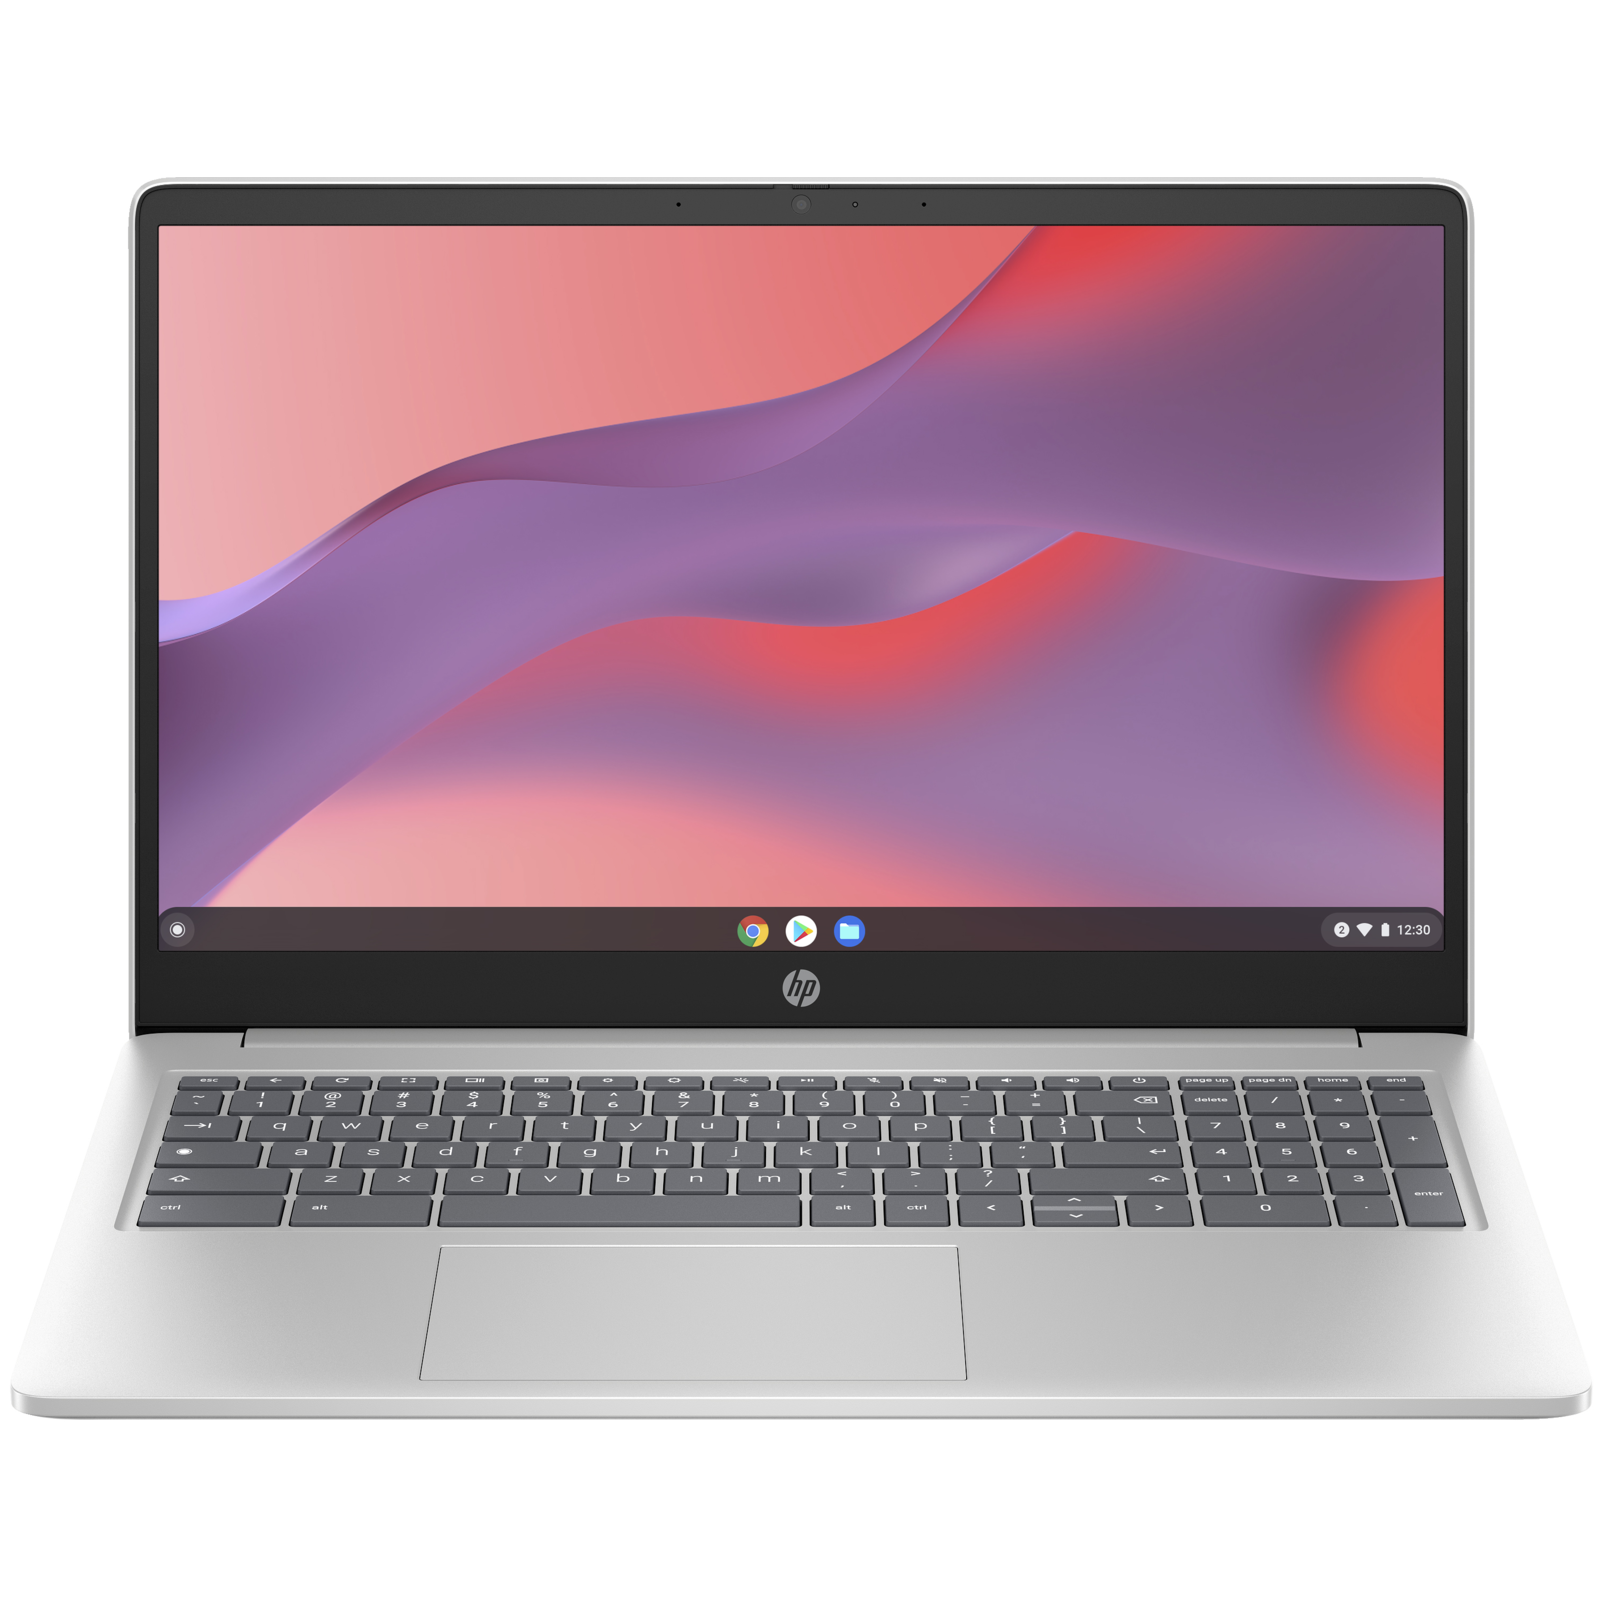 Front view of the HP Chromebook 15at